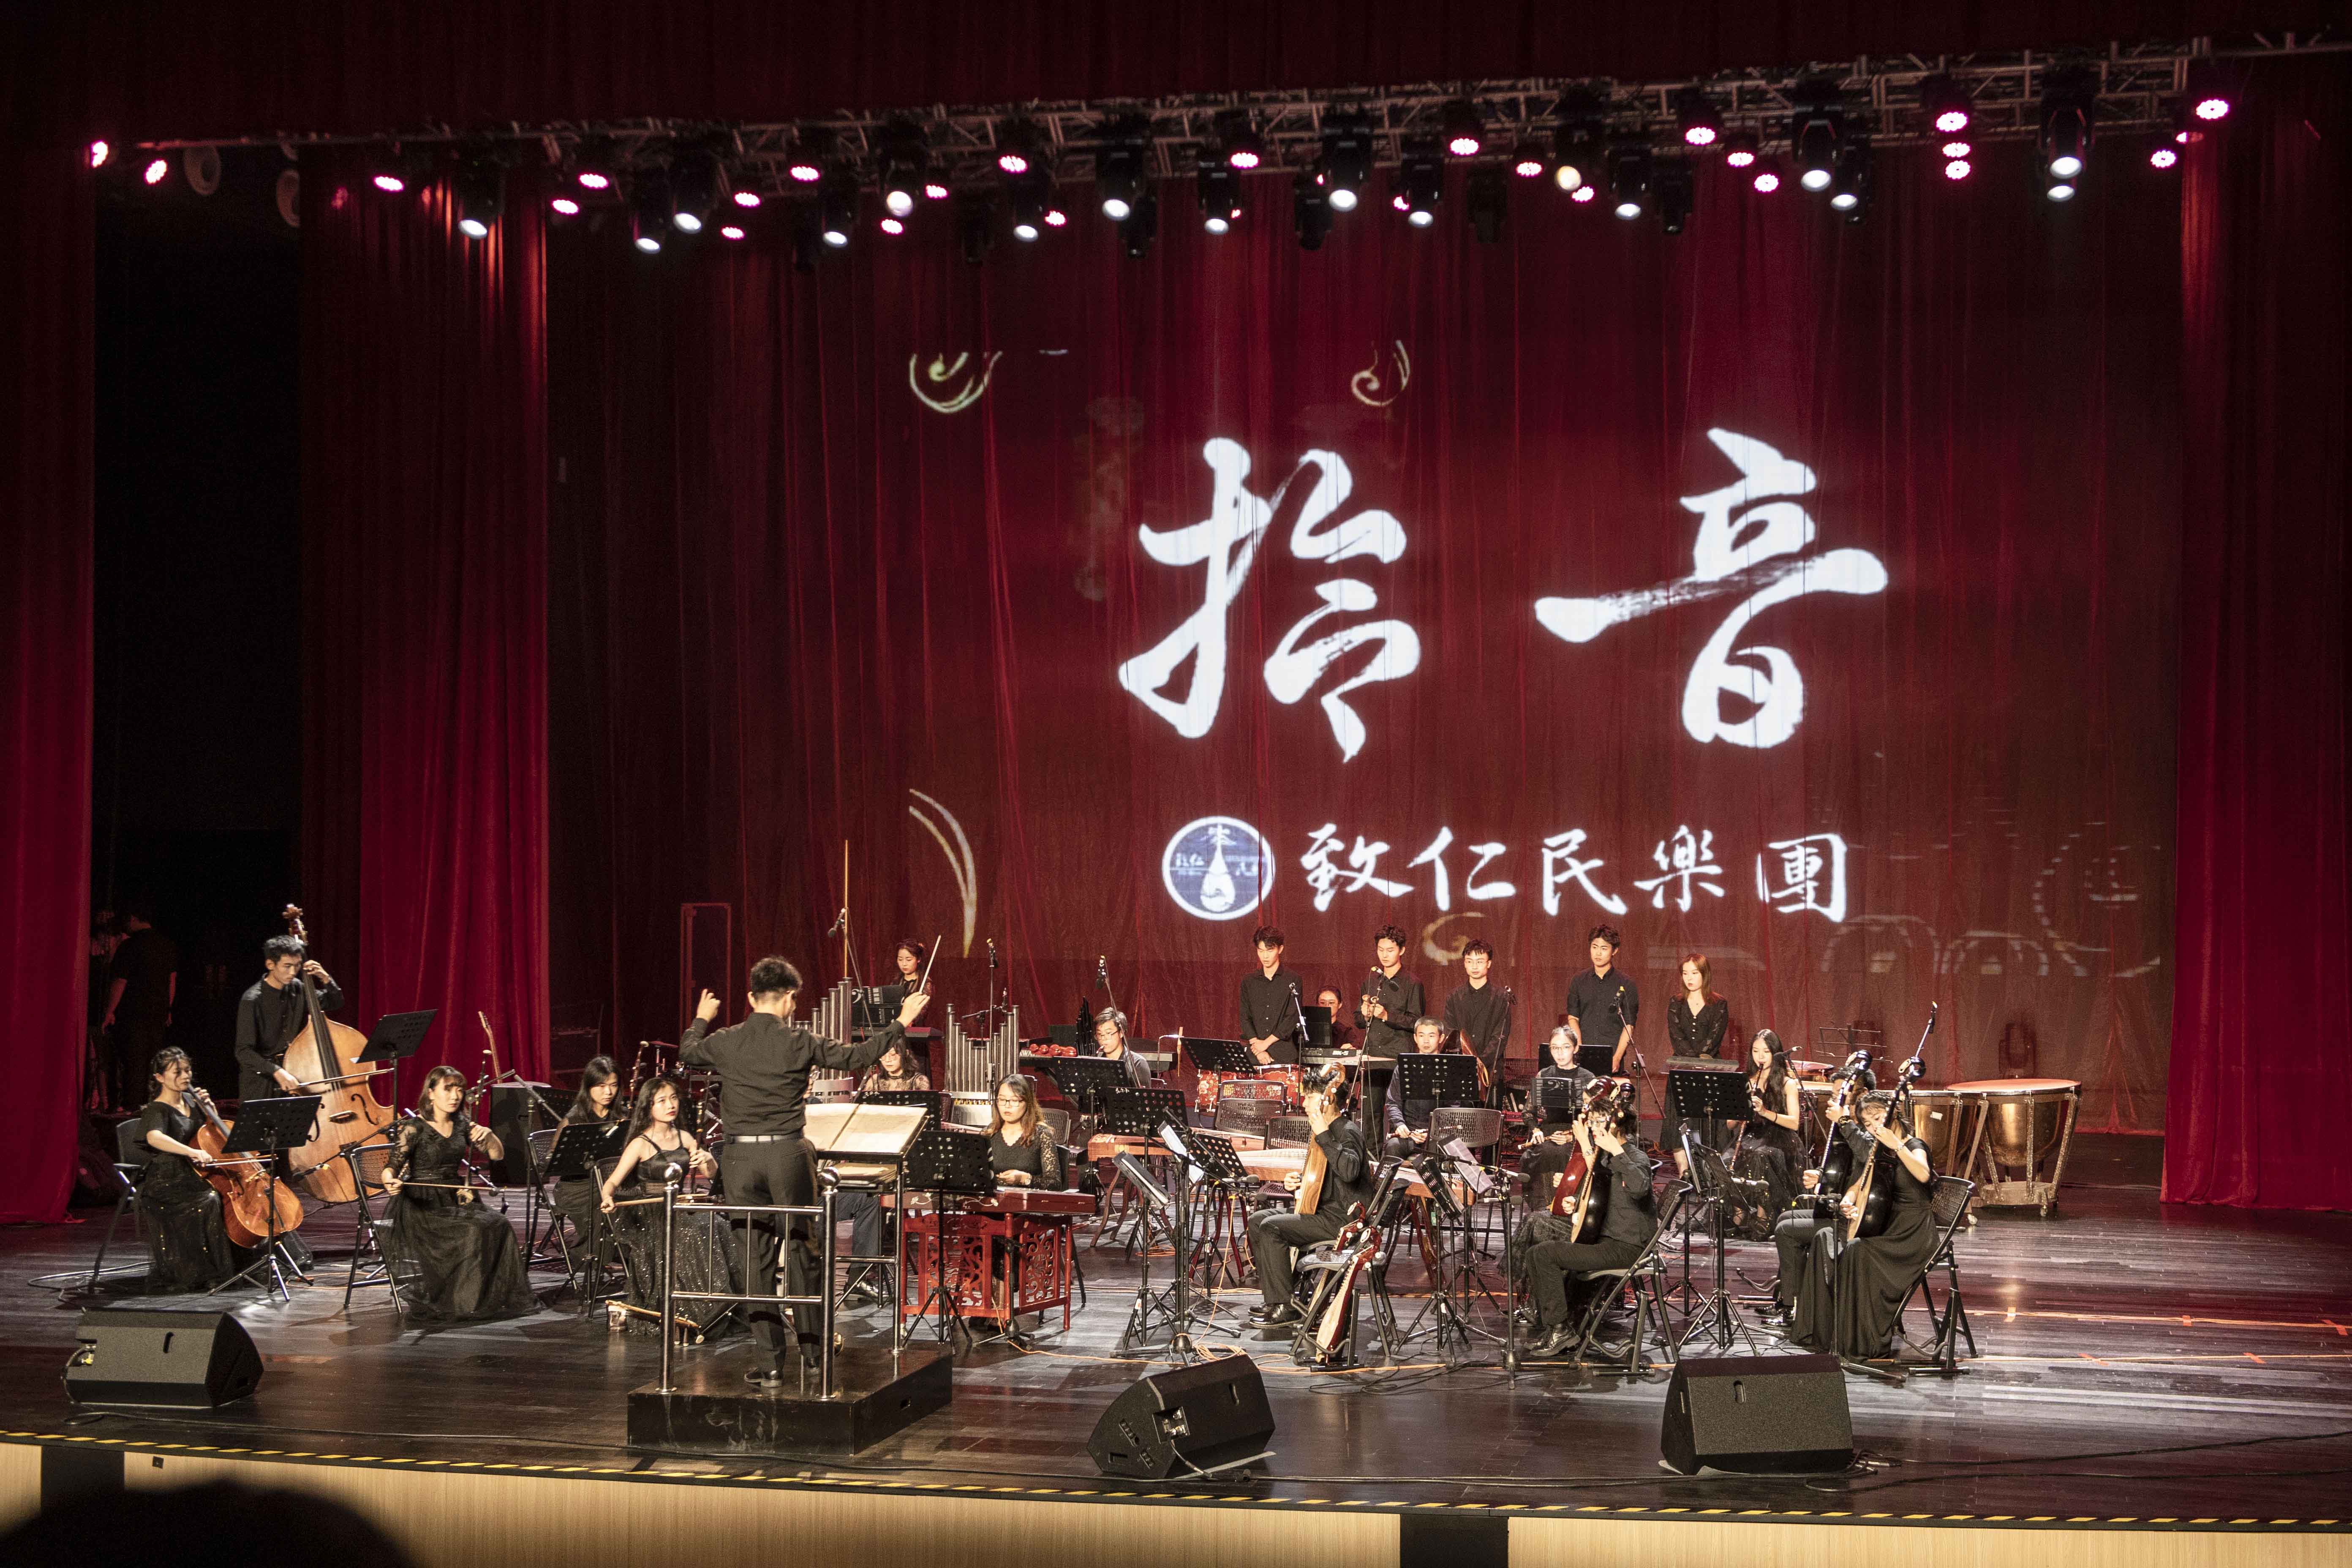 Zhiren Orchestra performs magnificently in special concert